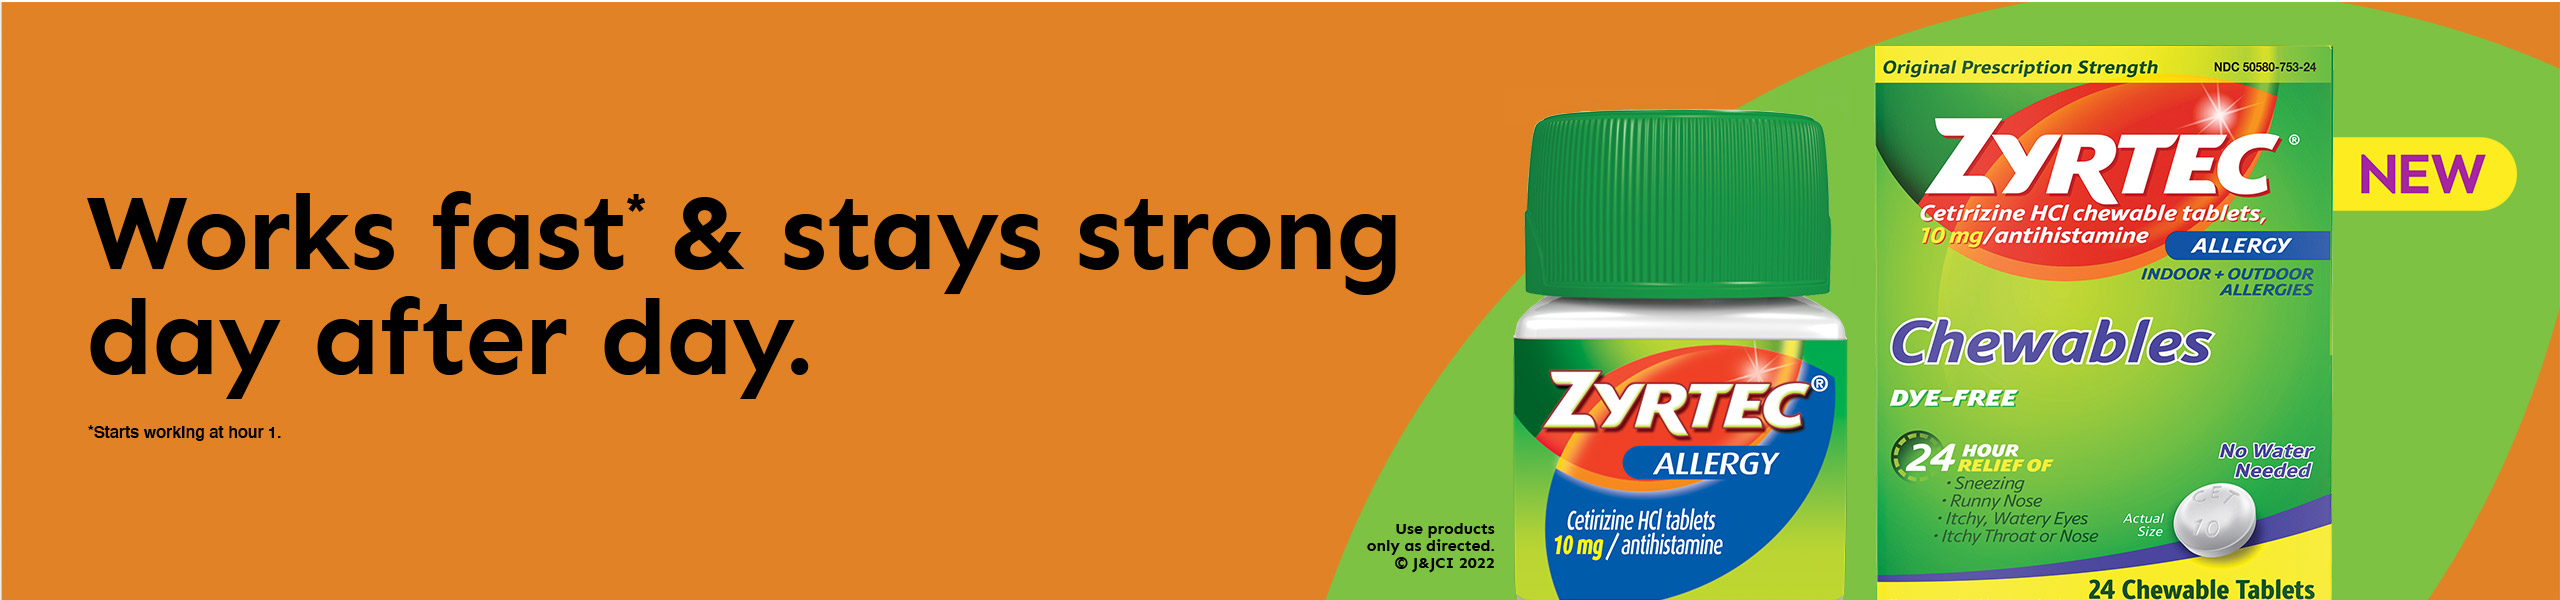 Works fast* & stays strong day after day. *Starts working at hour 1. Zyrtec allergy tablets and chewables product Zyrtec gives your relief from your worst allergy symptoms* Relieves sneezing, runny nose, itchy, watery eyes and itching of the nose or throat